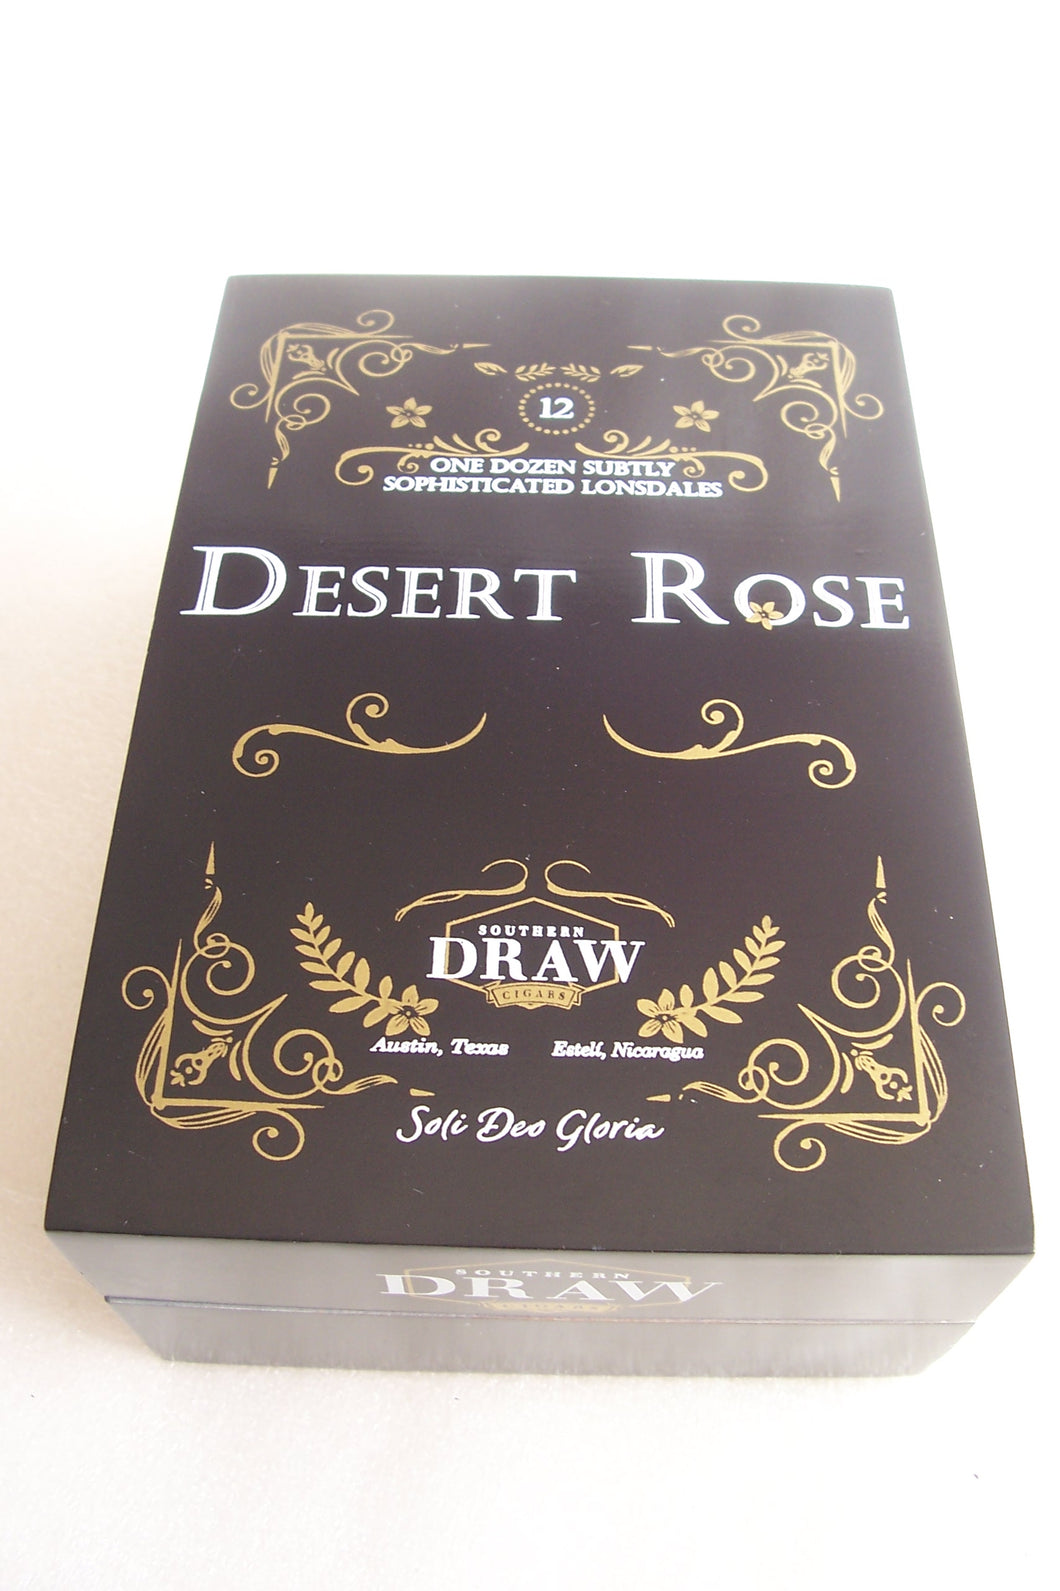 Southern Draw Rose of Sharon Desert Rose Lonsdales Empty Cigar Box